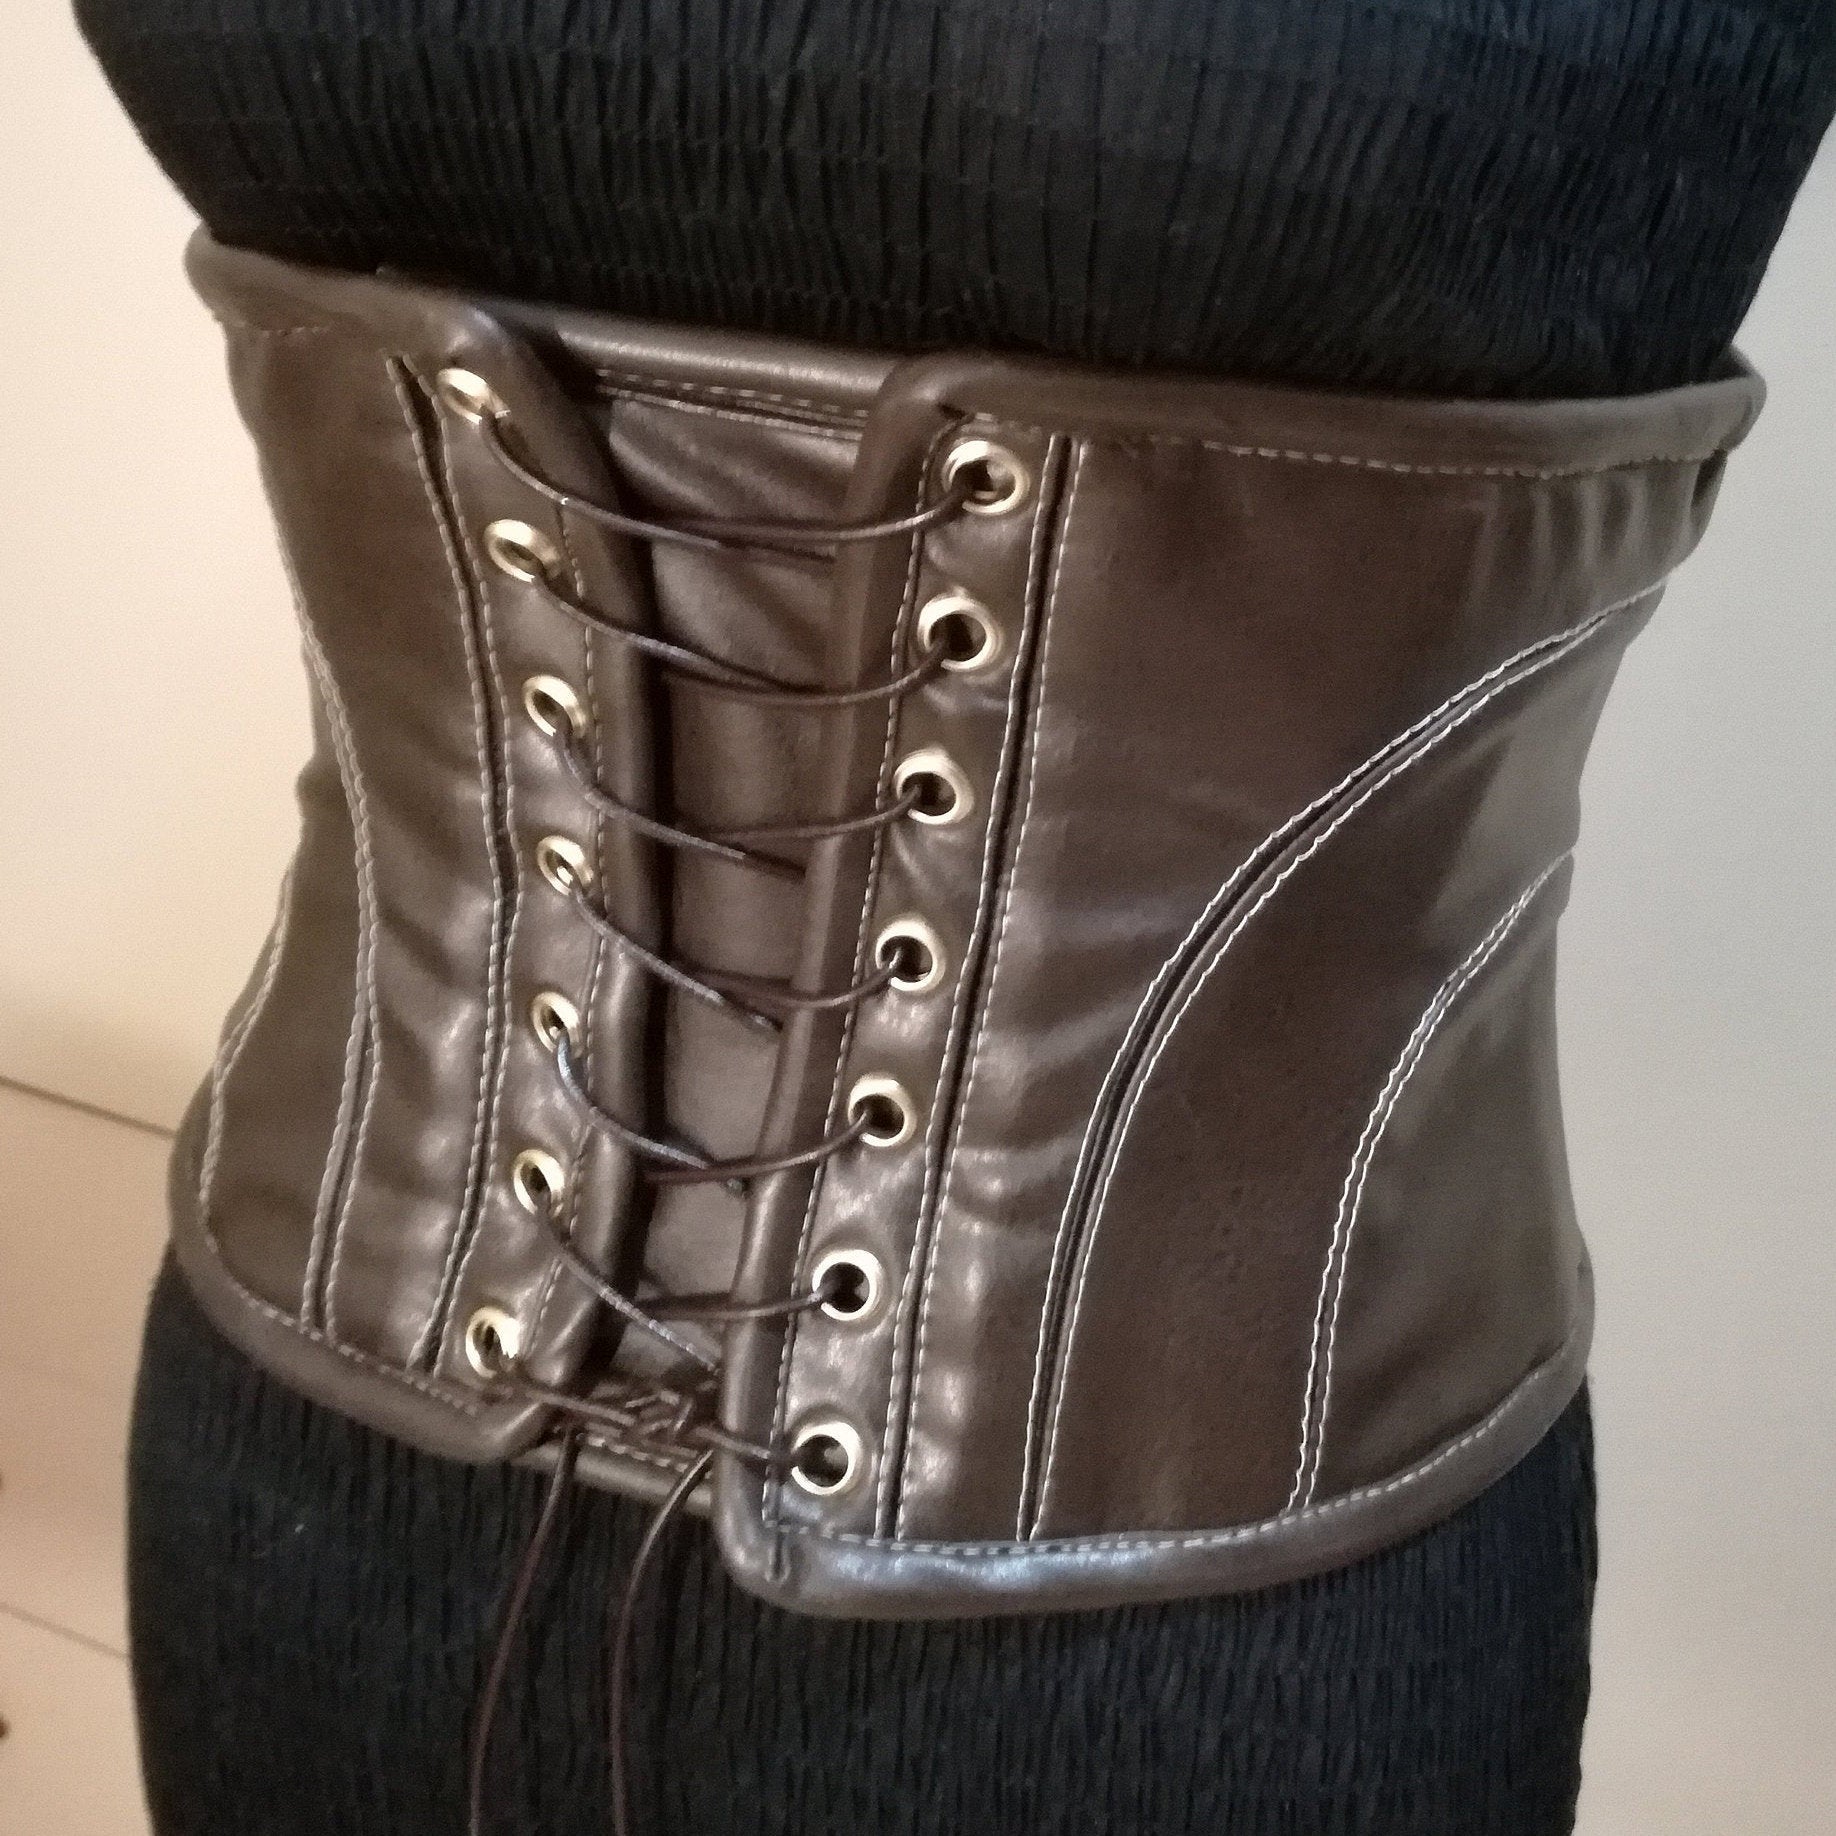 Adult Yennefer The Witcher's Corset Underbust